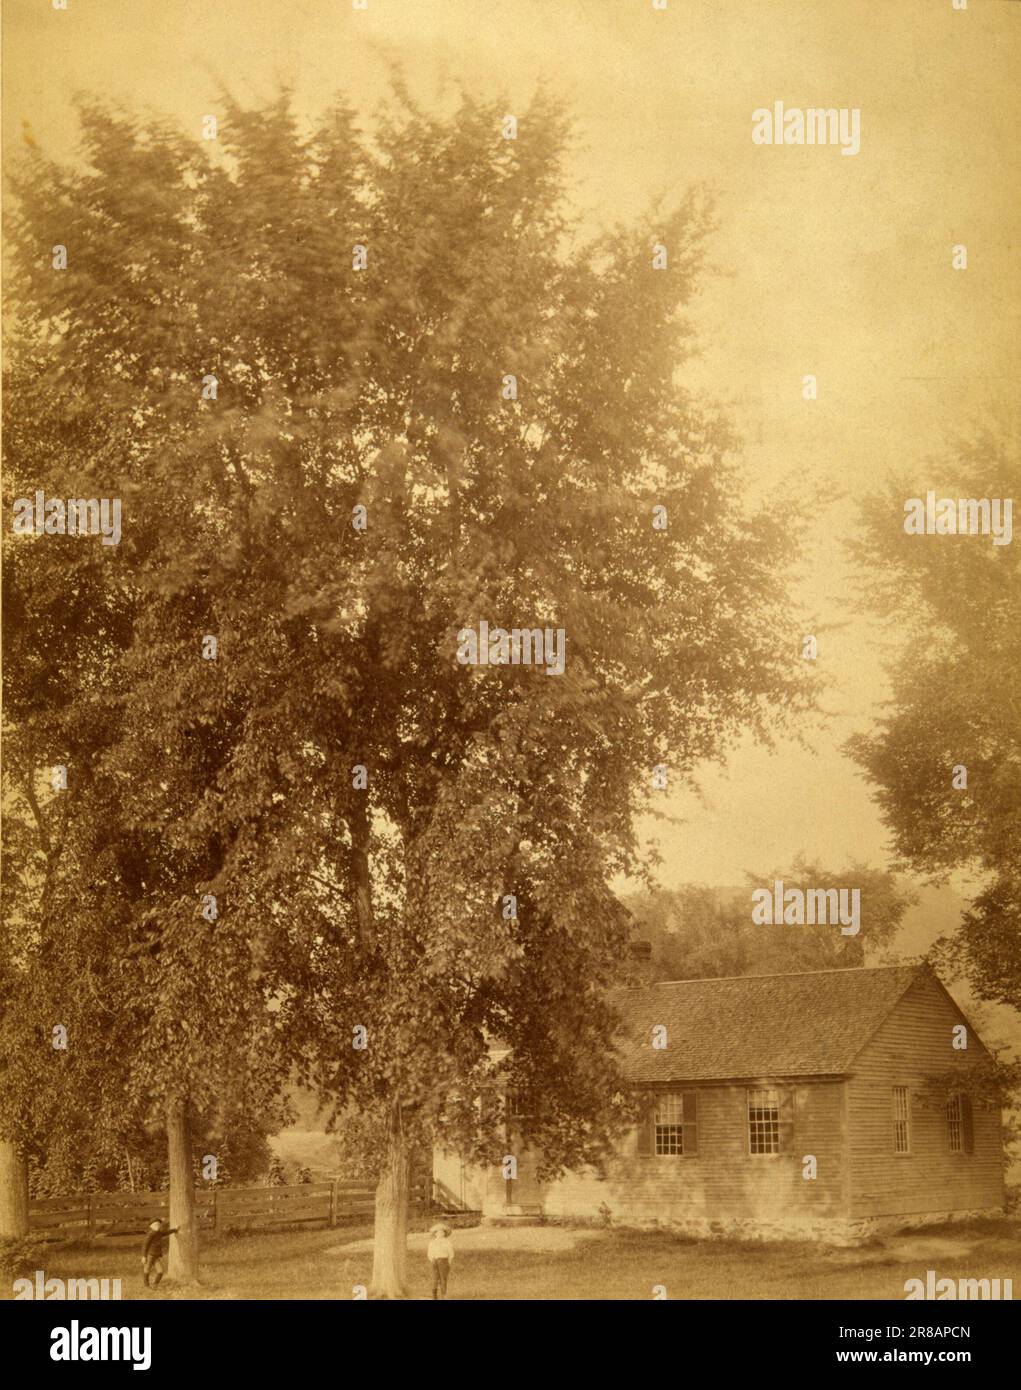 Village Schoolhouse, from the album Views of Charlestown, New Hampshire 1888 by Gotthelf Pach, active 1880s Stock Photo